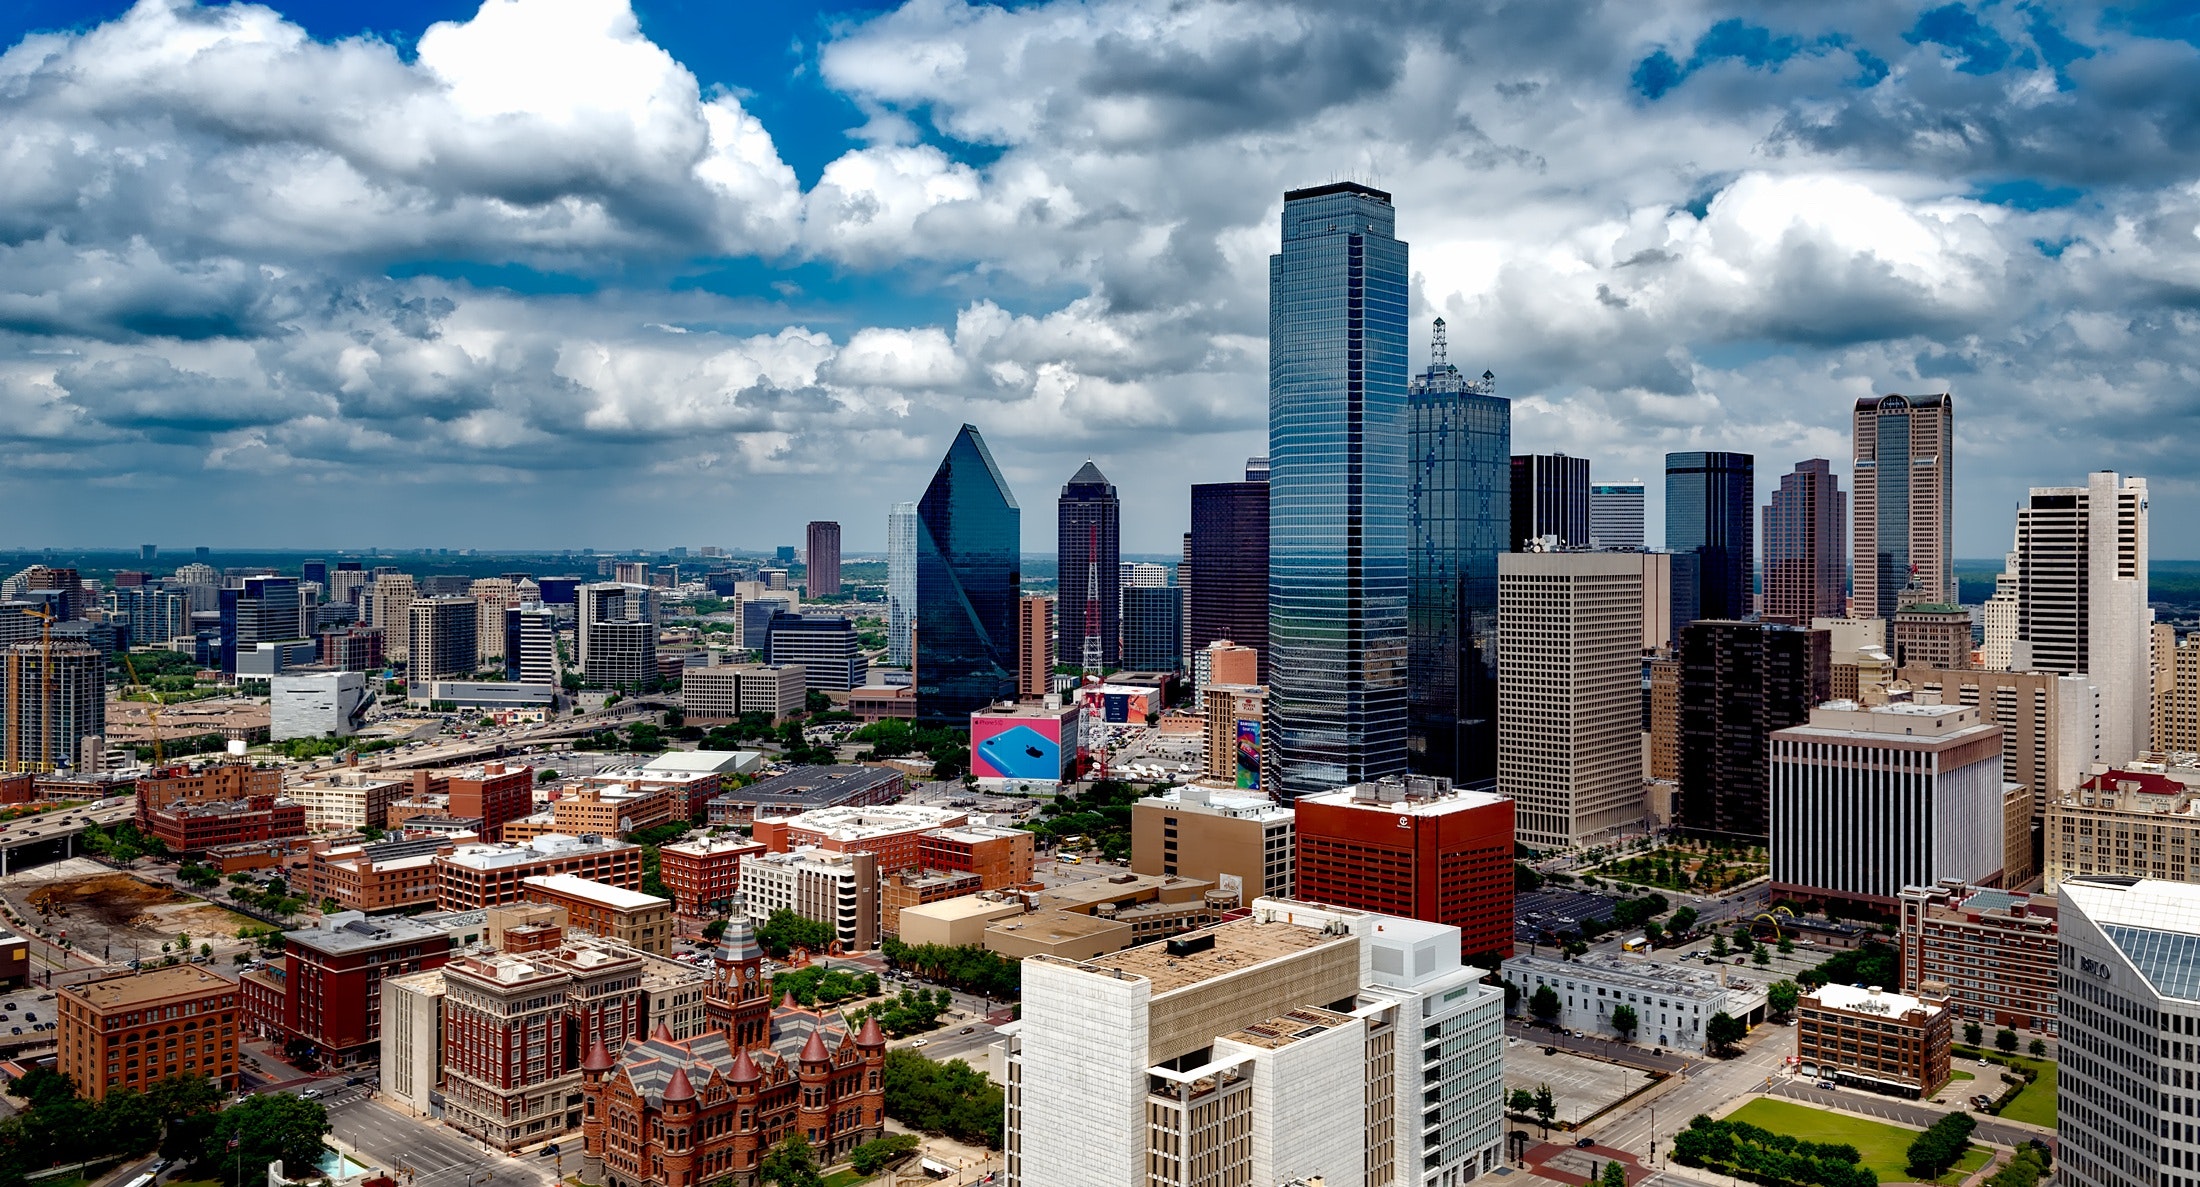 Dallas, Texas. If you're looking for investment assistance, we can help.